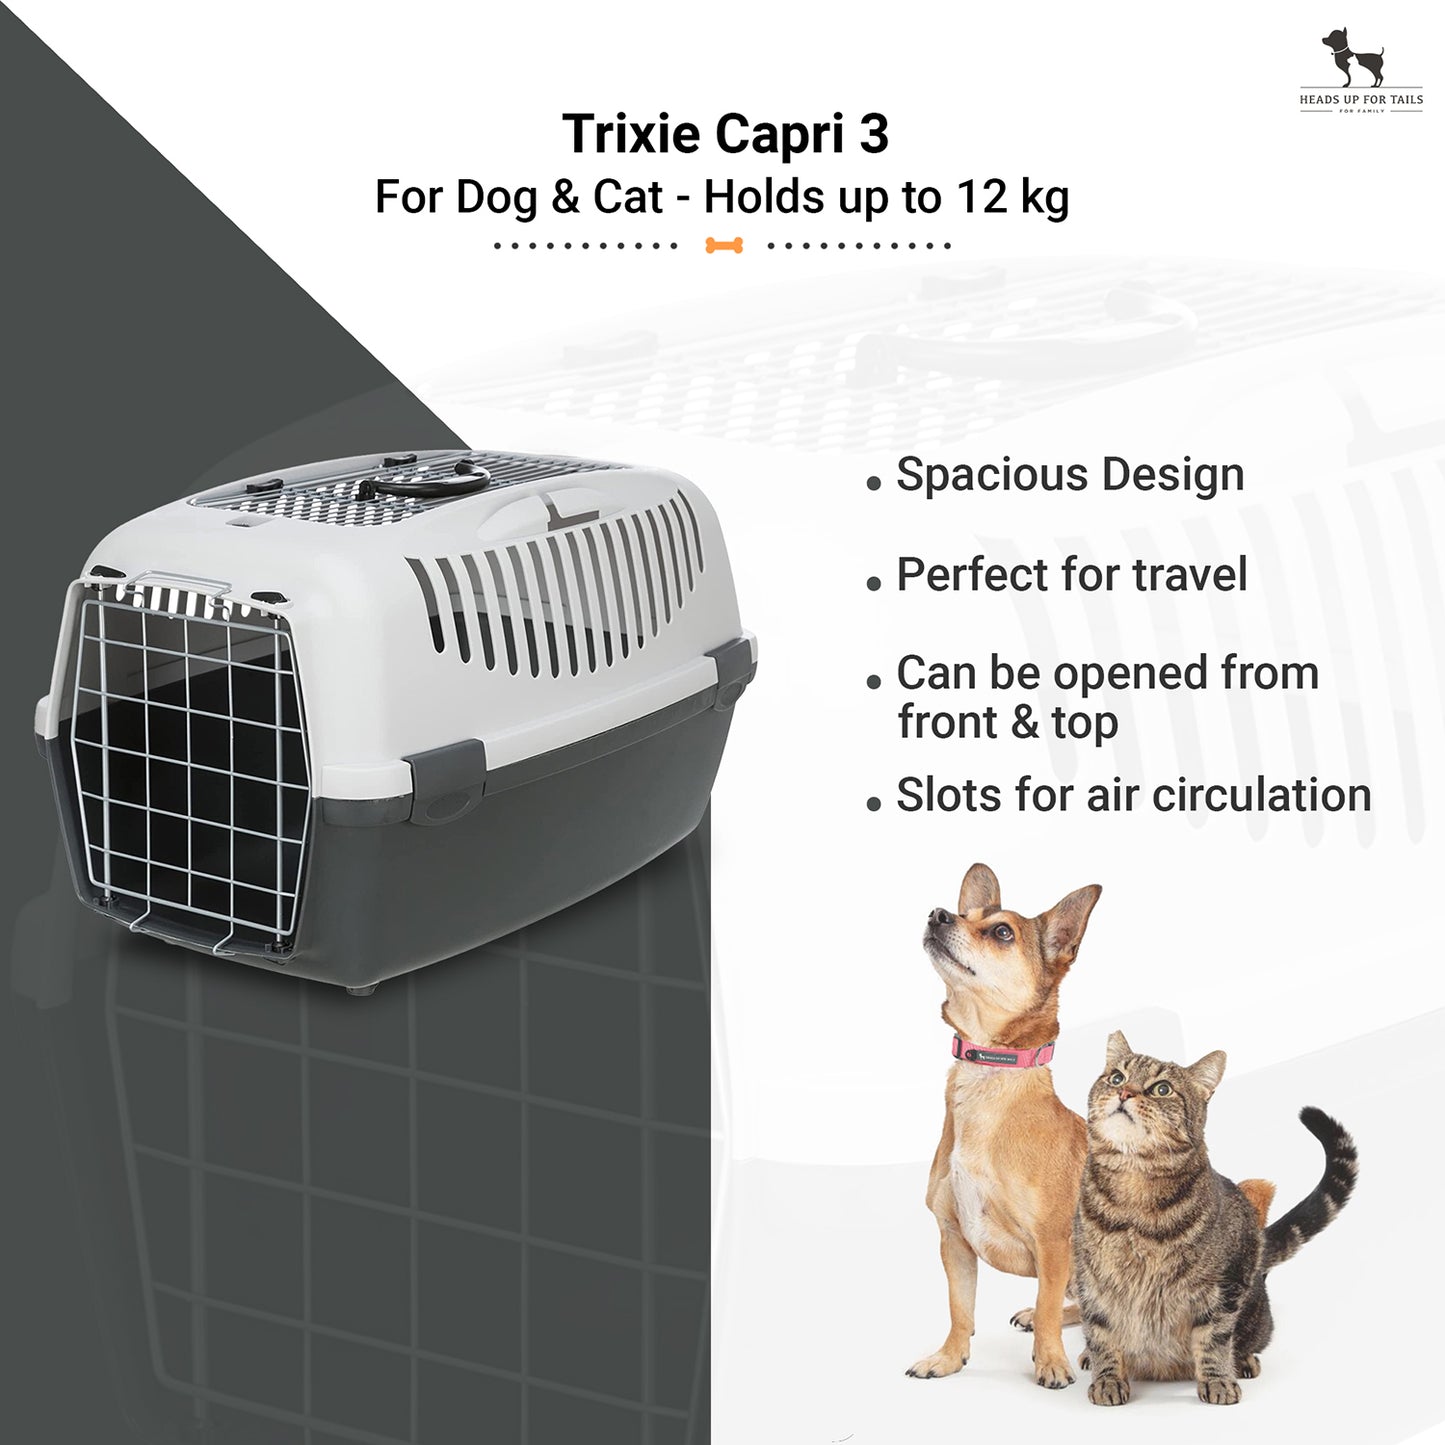 Trixie Capri 3 Open Top Pets Carrier - Grey - 24 X 16 X 15 Inch - Holds up to 12 kg - Heads Up For Tails